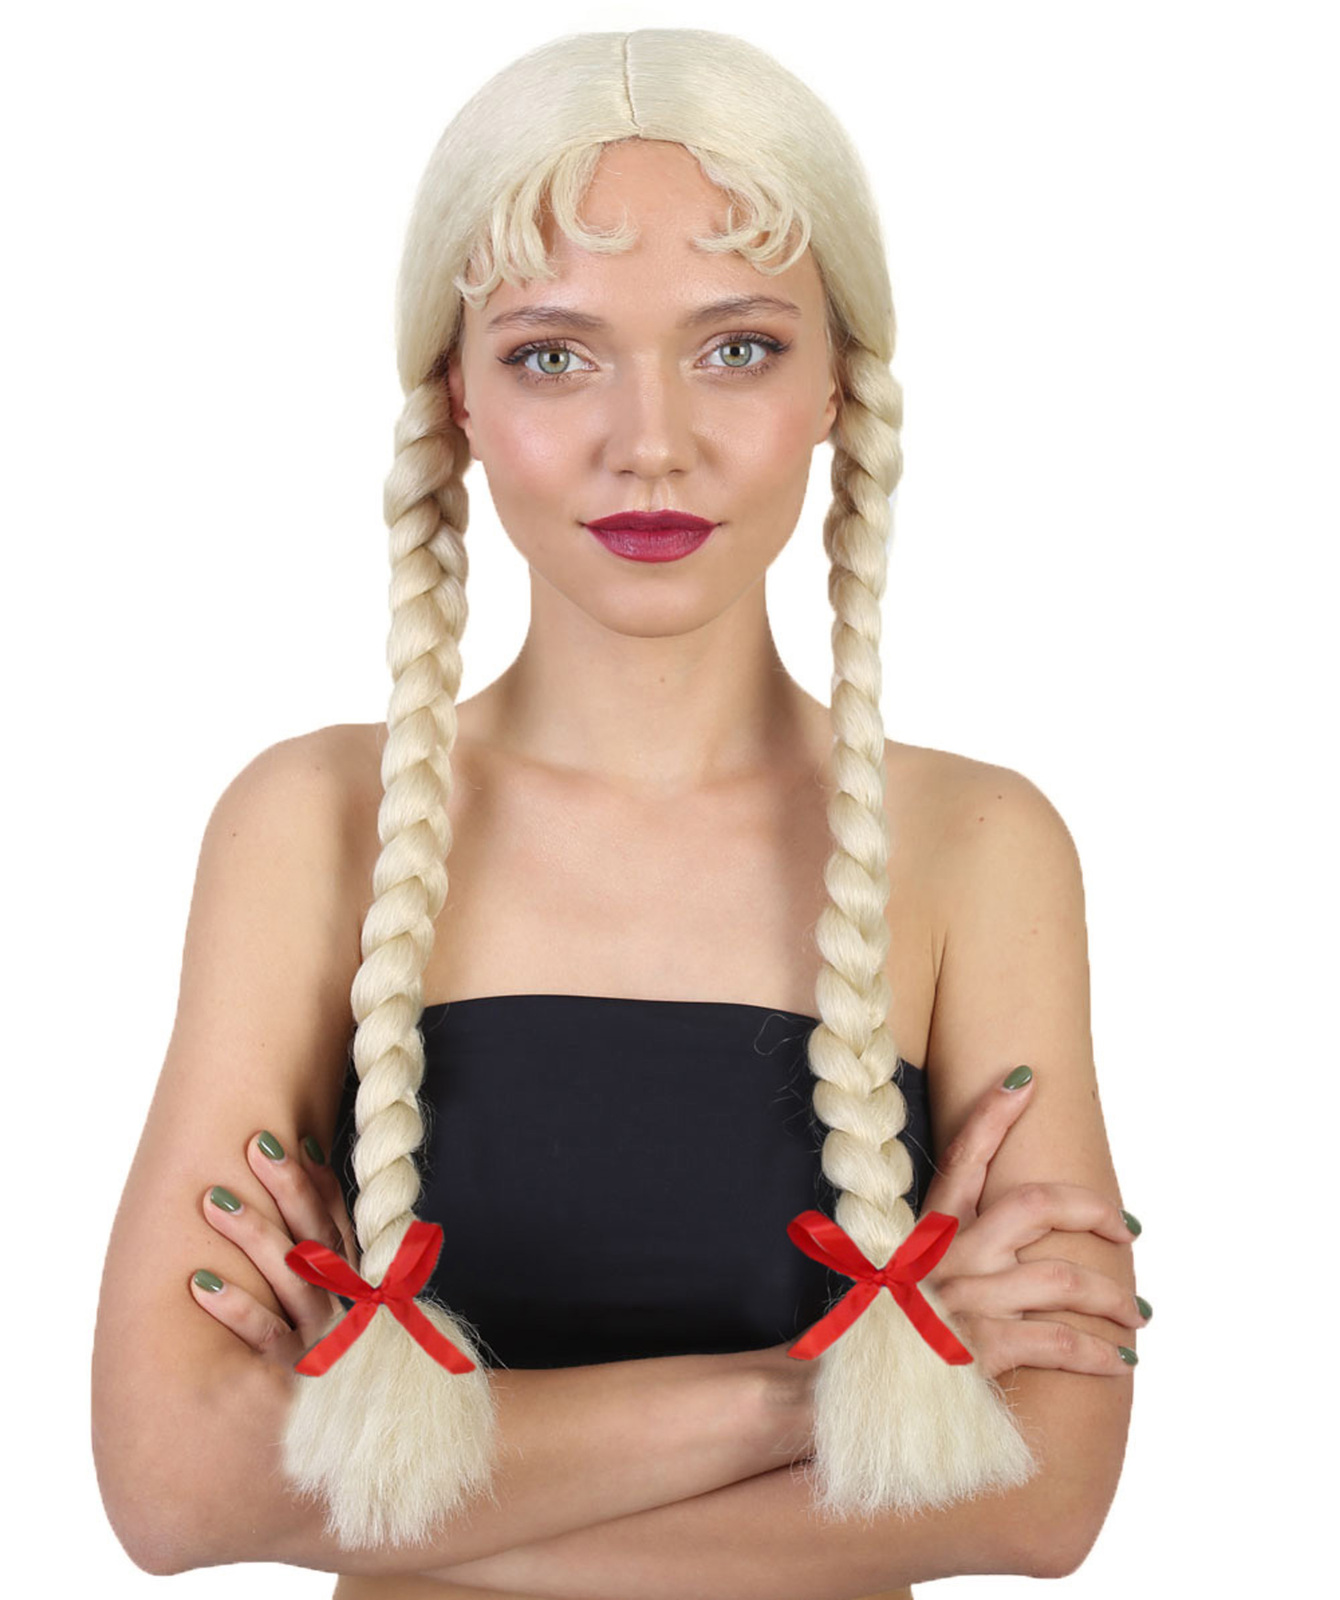 Women's Dutch Girl Wig | Long Braided Wig Multiple Colors Option